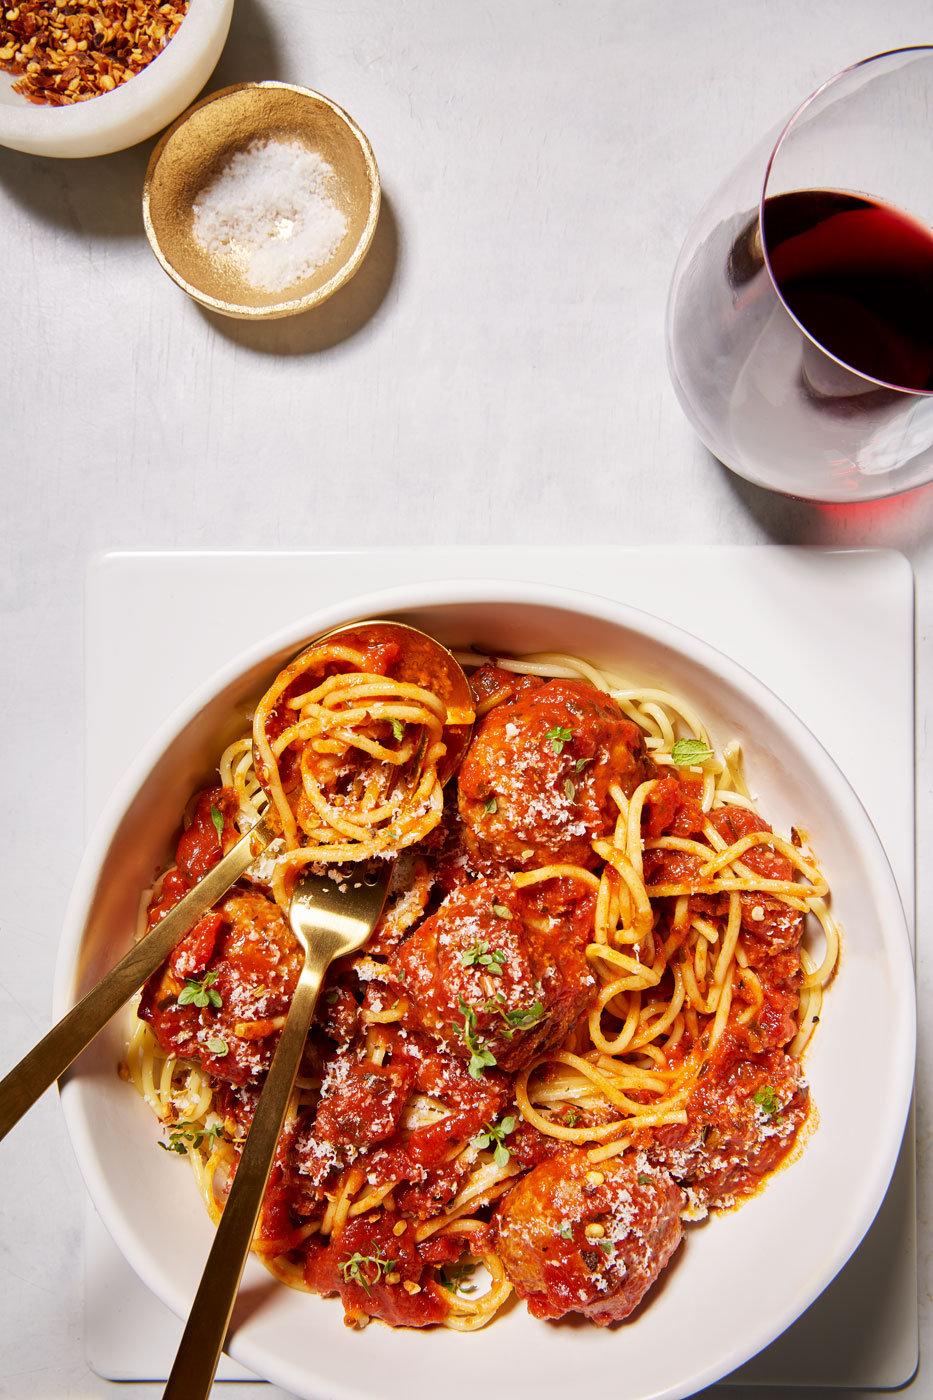 Spaghetti & Meatballs with Red Wine